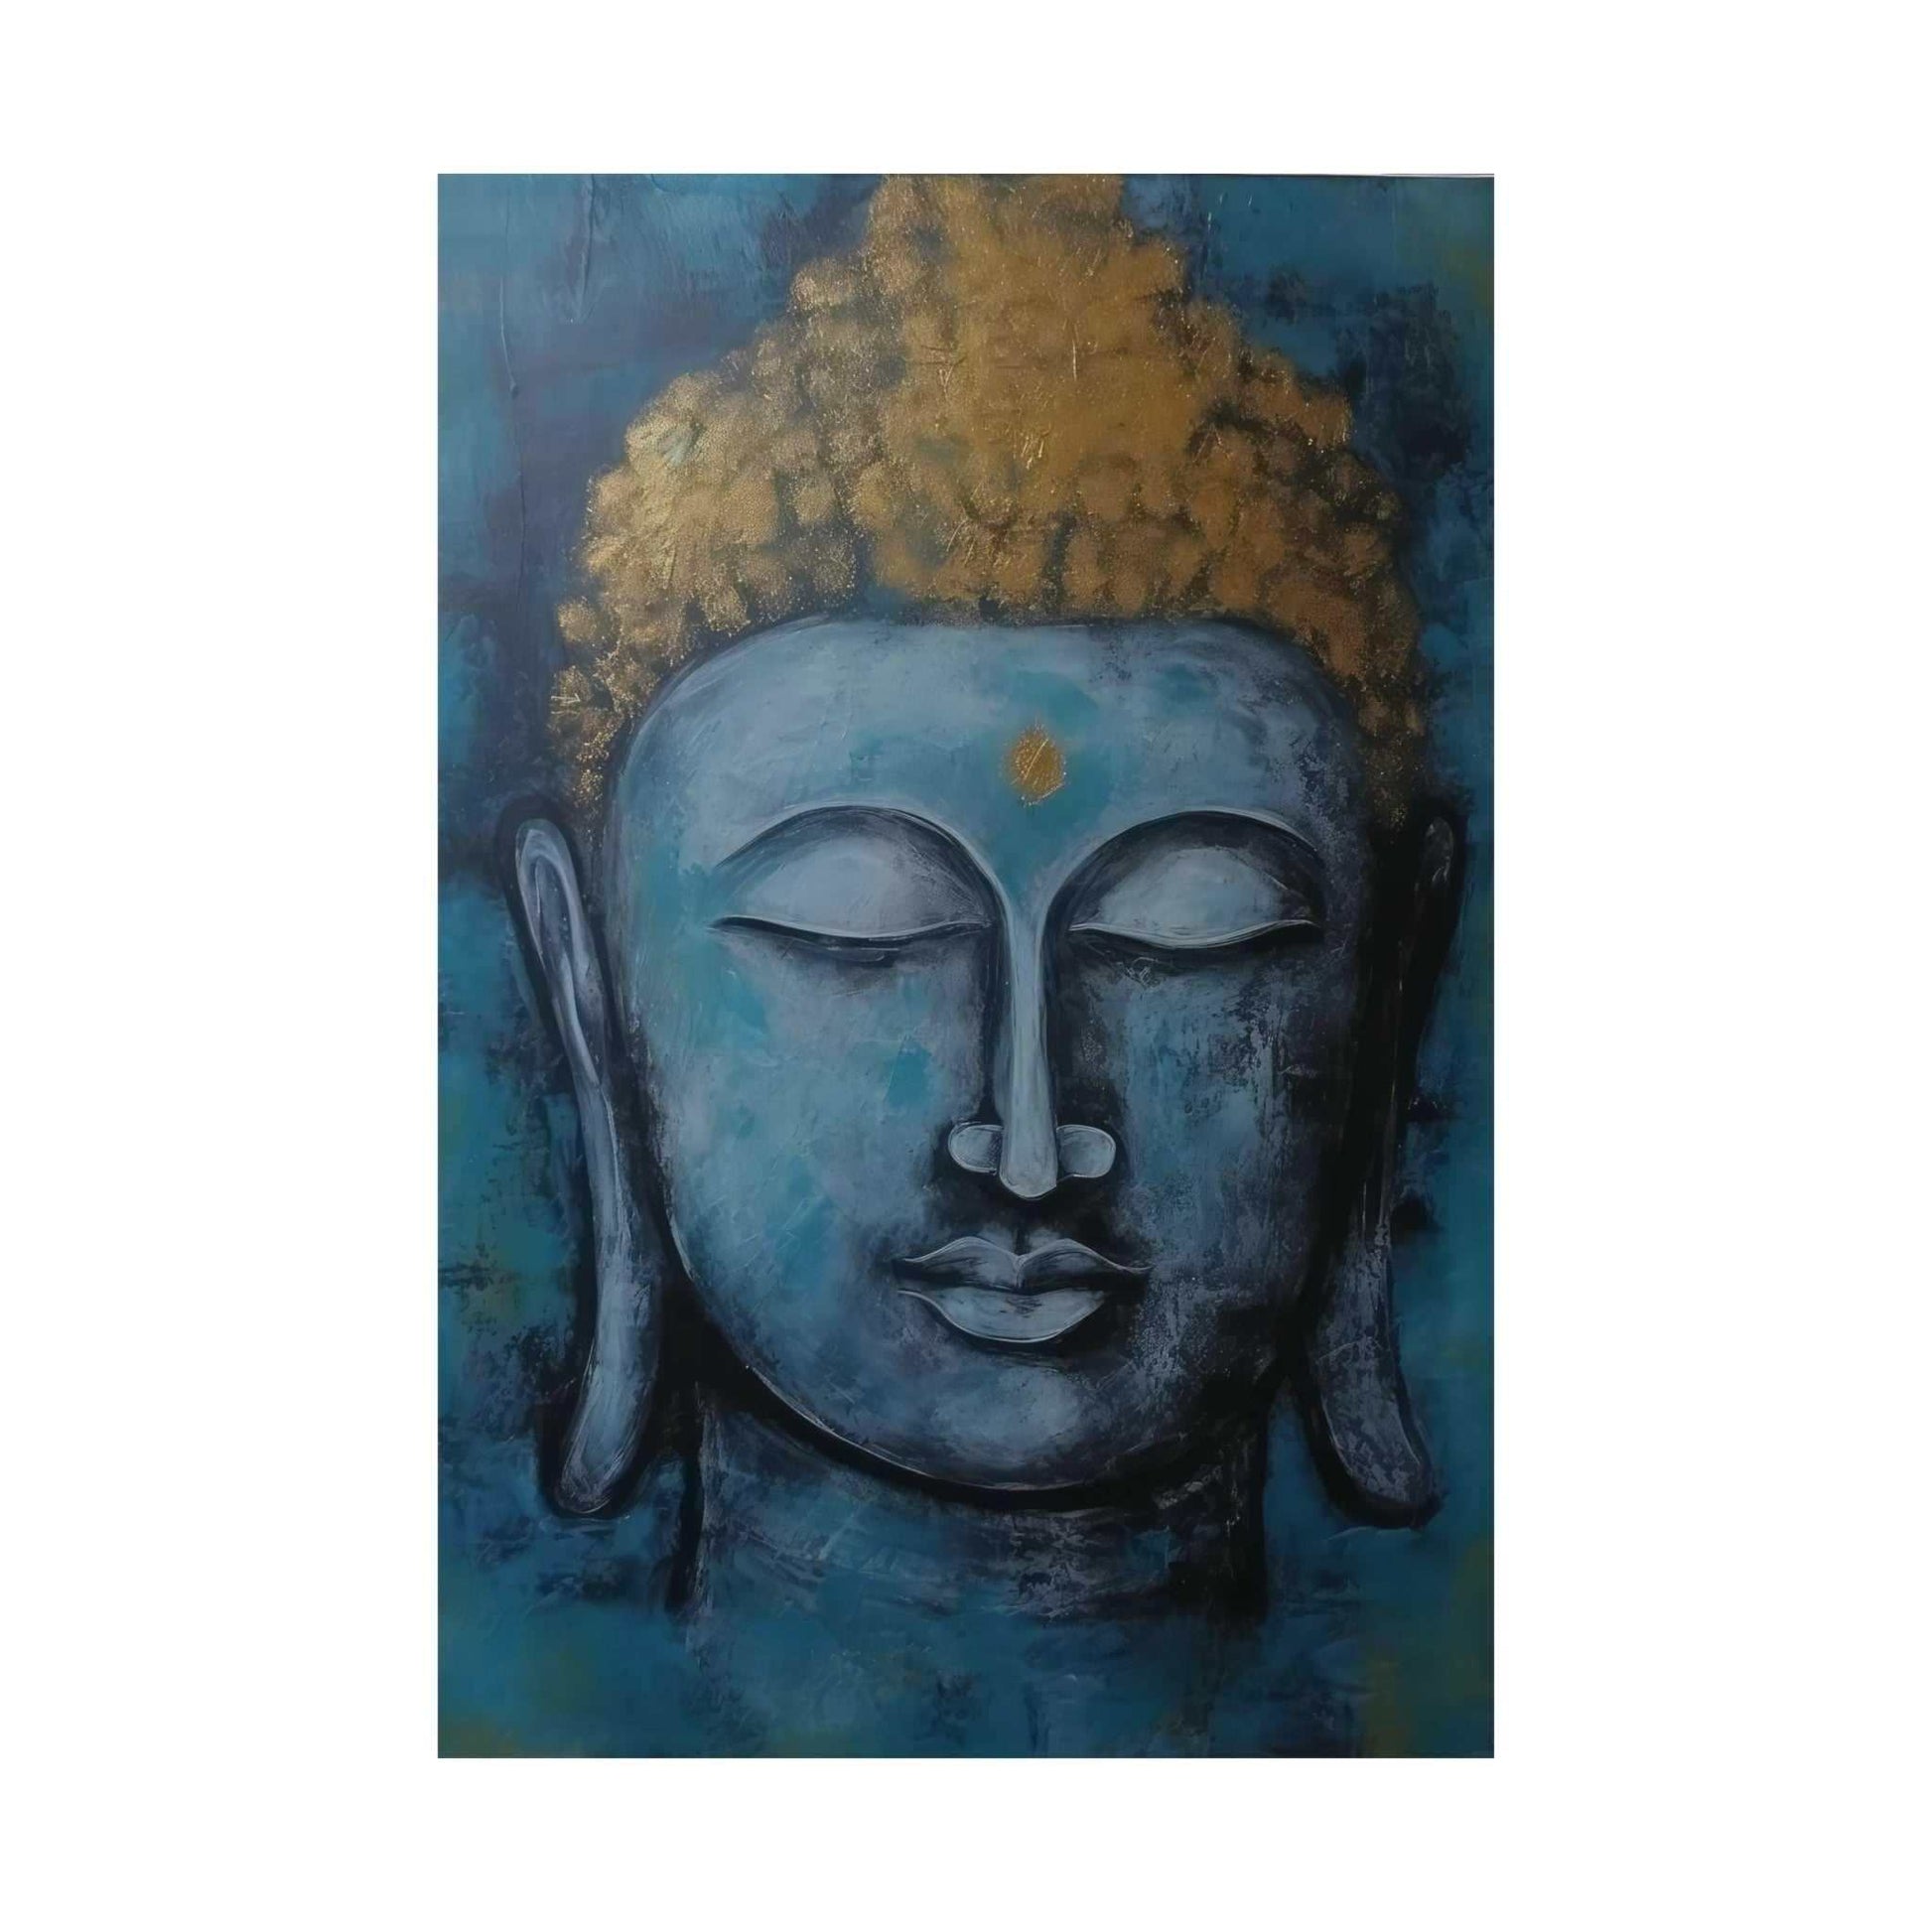 ZenArtBliss.com's Tibetan Buddha poster, featuring abstract hues of blue and gold on matte finish paper, inspired by traditional Tibetan art.